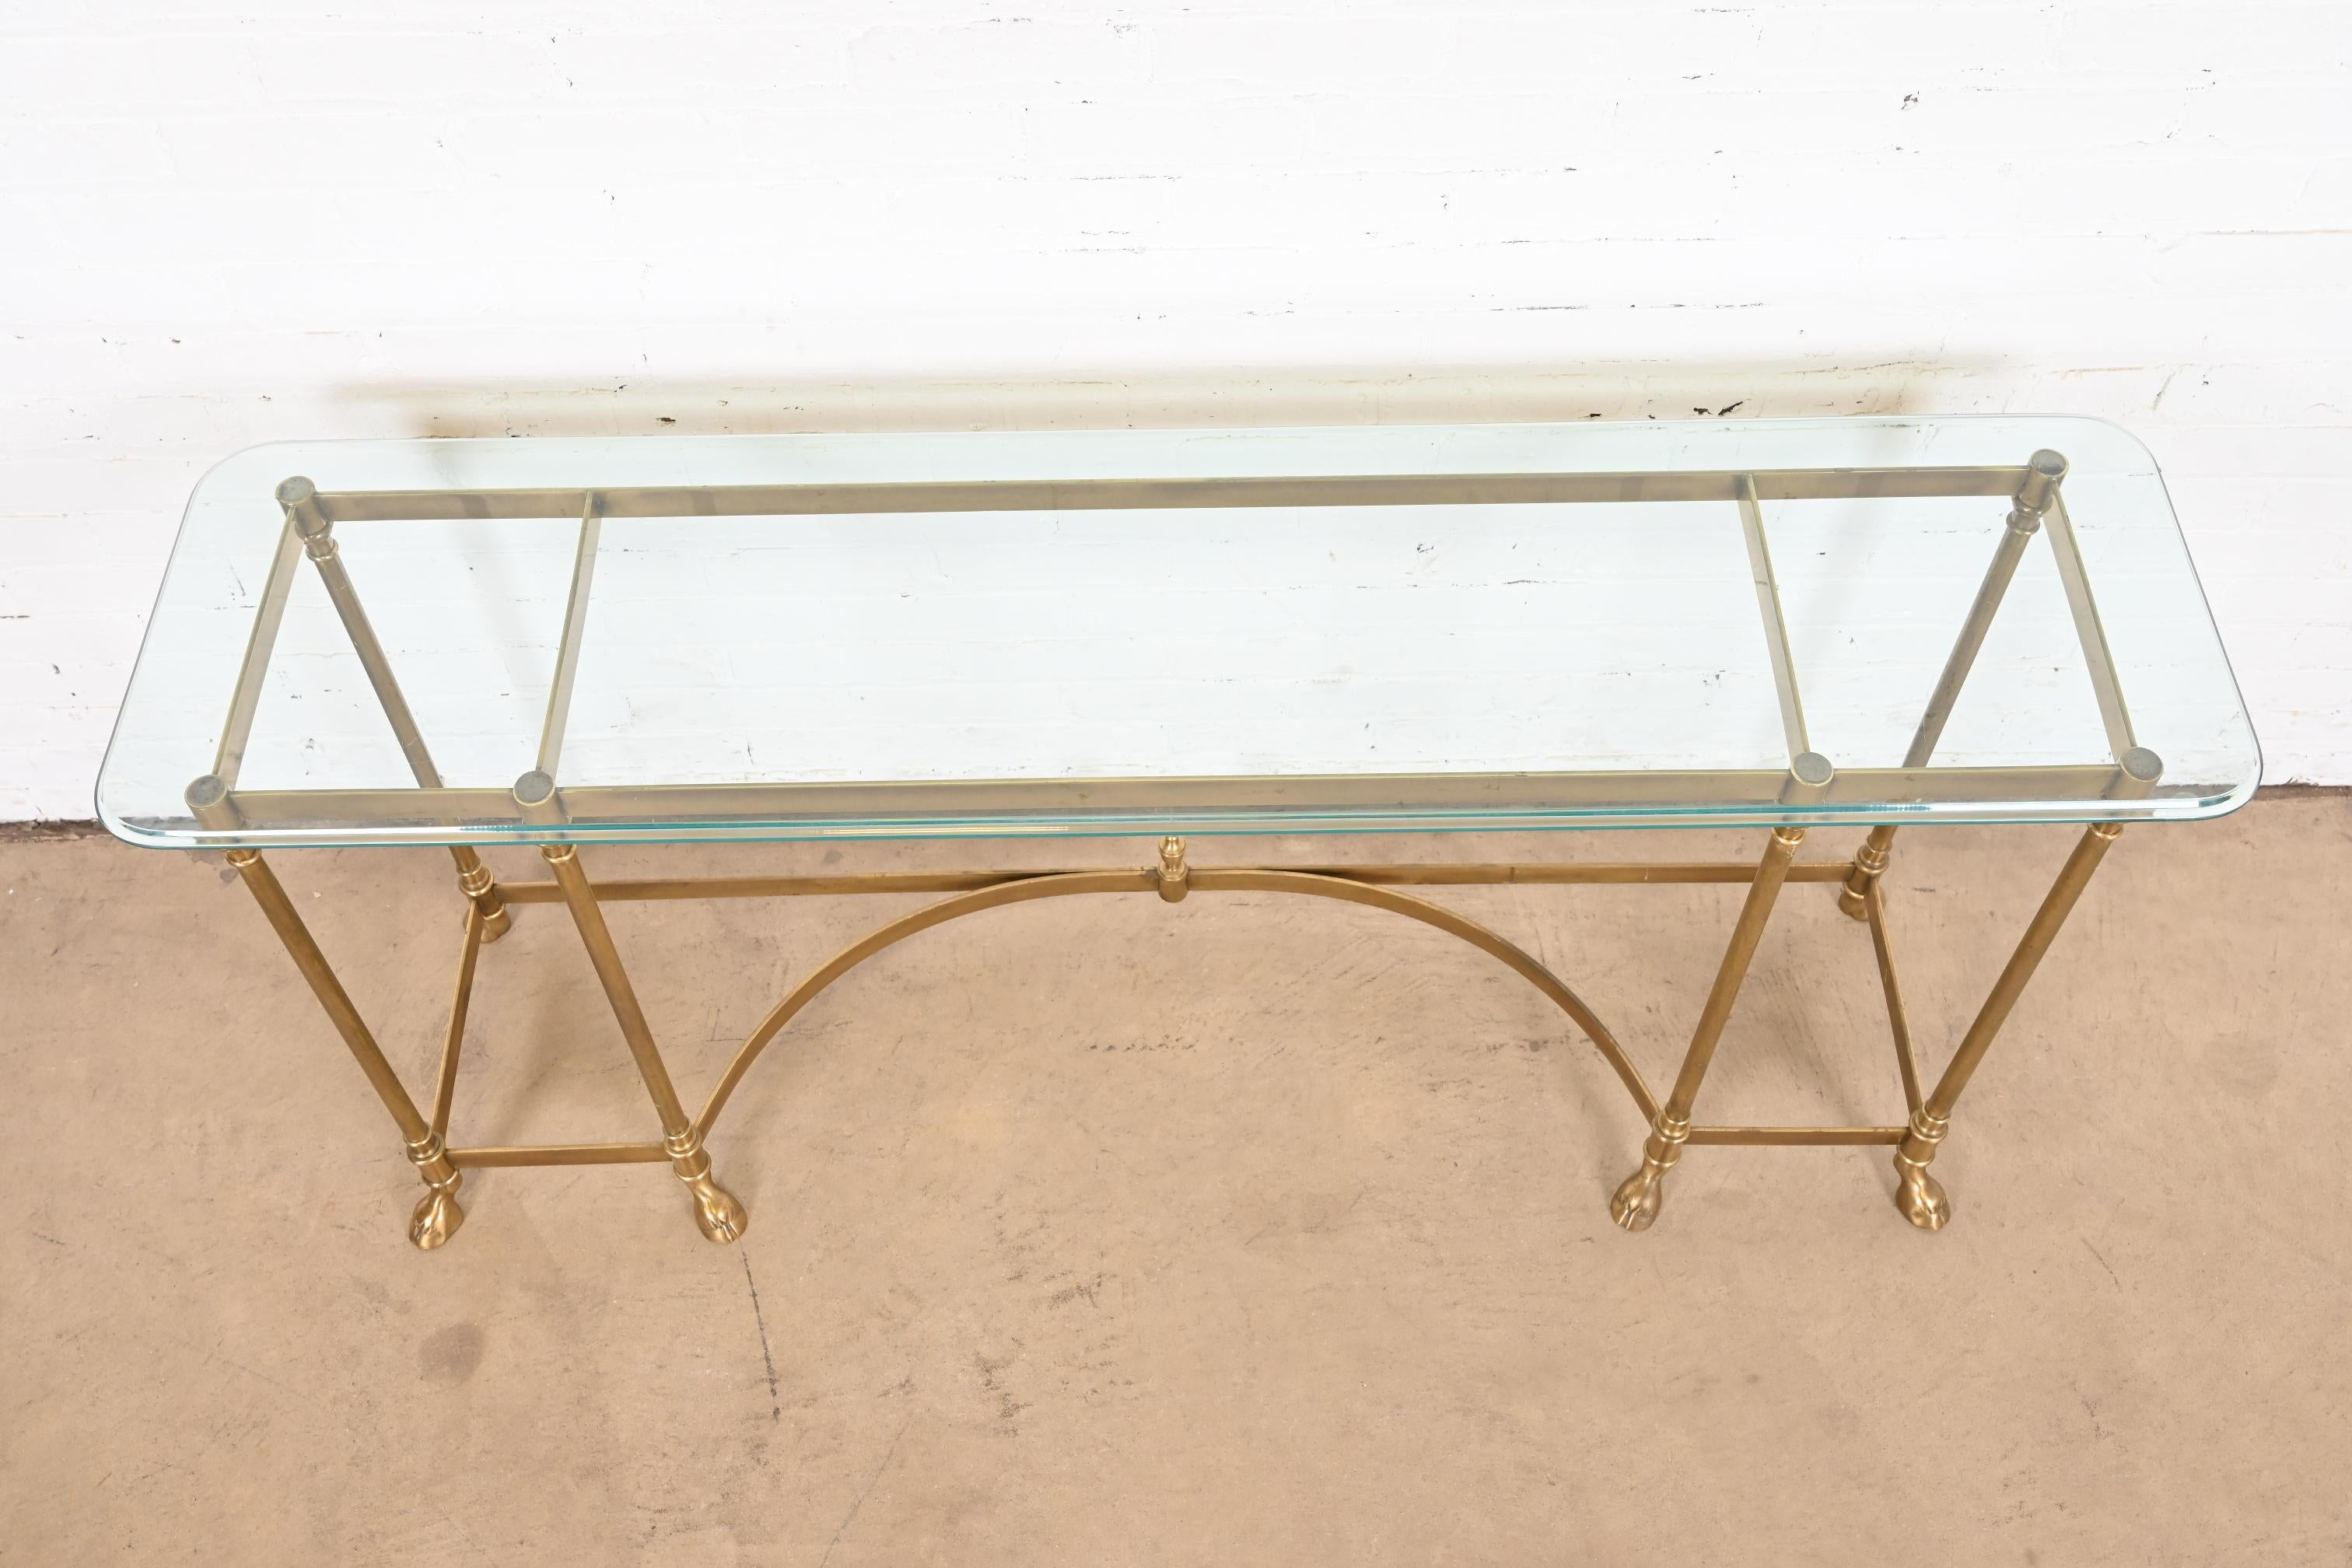 Labarge Hollywood Regency Brass and Glass Hooved Feet Console Table, Circa 1960s For Sale 2